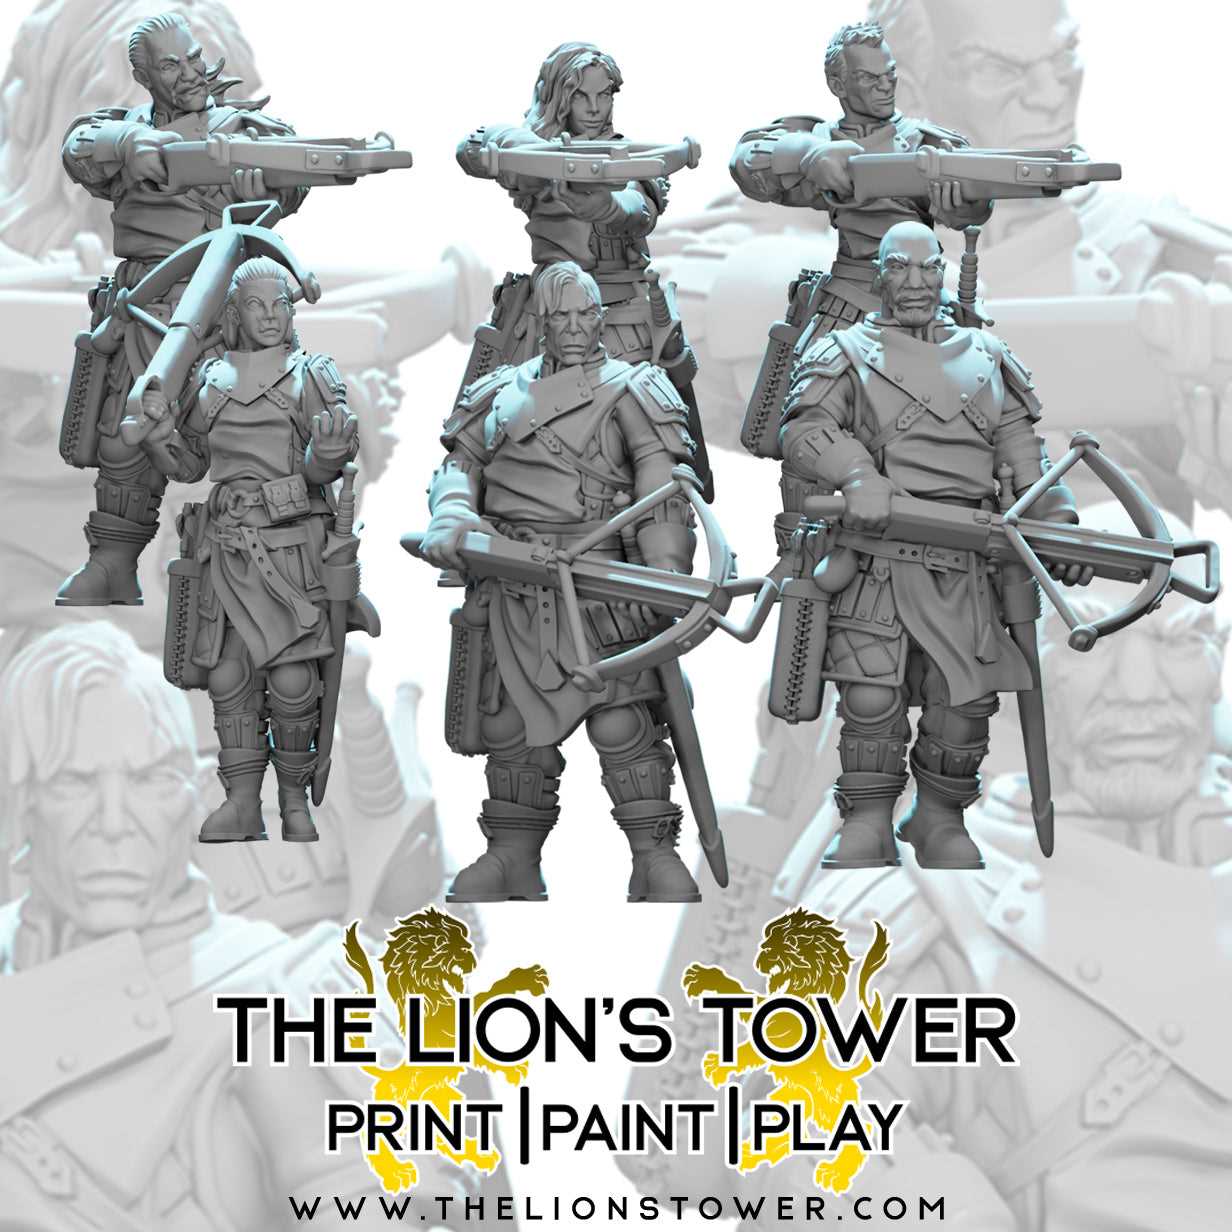 Mercenary Company with Crossbows (Set of 6 x 32mm scale resin miniatures with MDF bases)